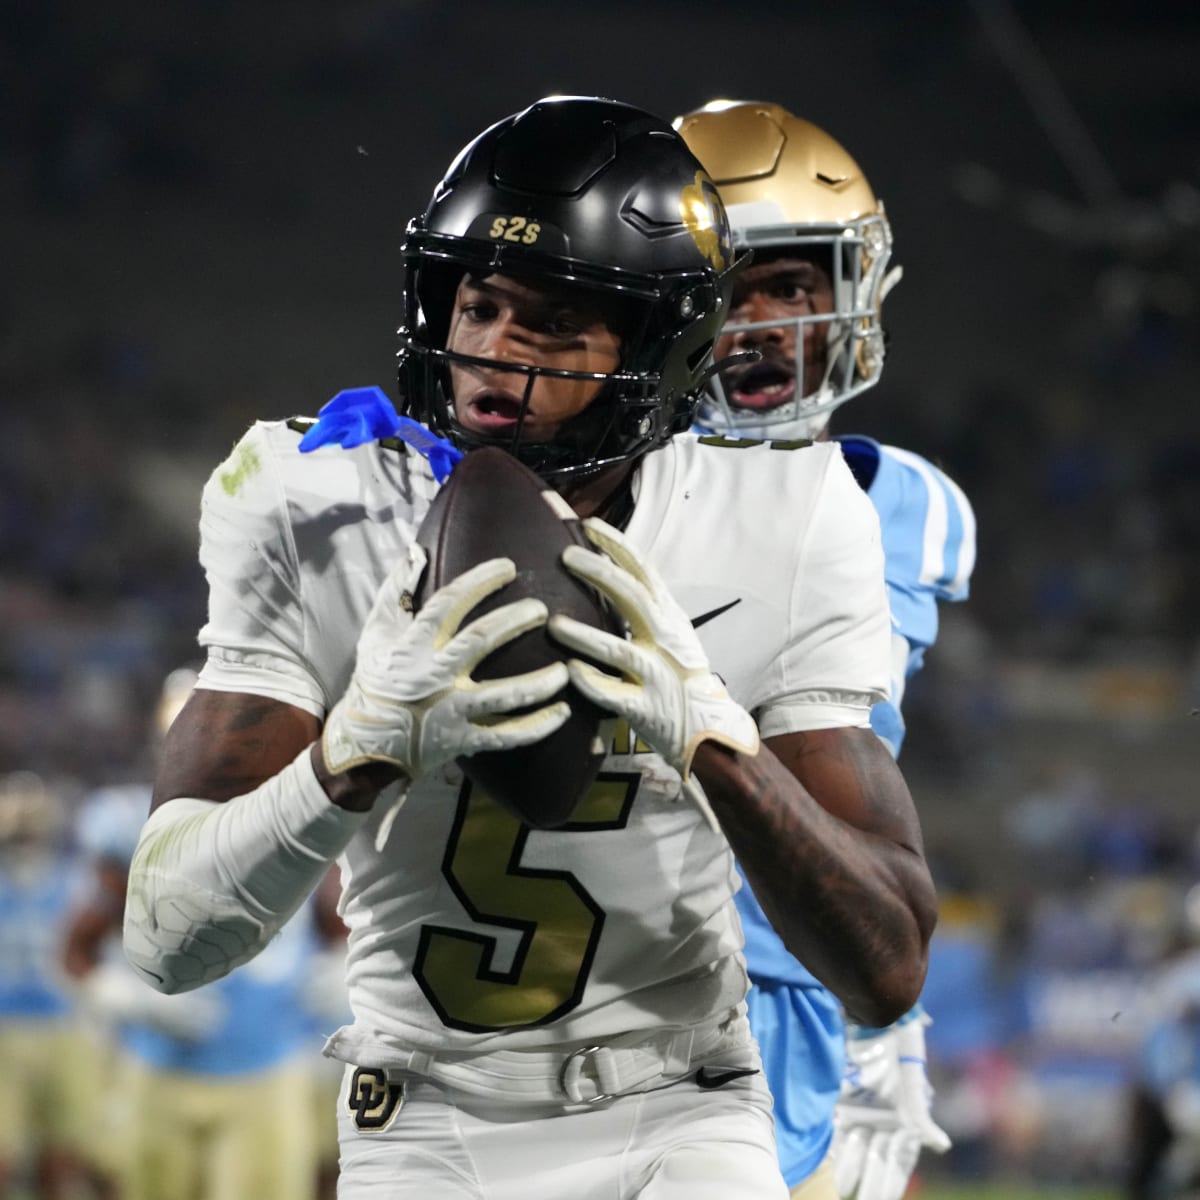 Colorado's Jimmy Horn Jr. finds Dylan Edwards for 30-yard touchdown vs.  Utah - Sports Illustrated Colorado Buffaloes News, Analysis and More